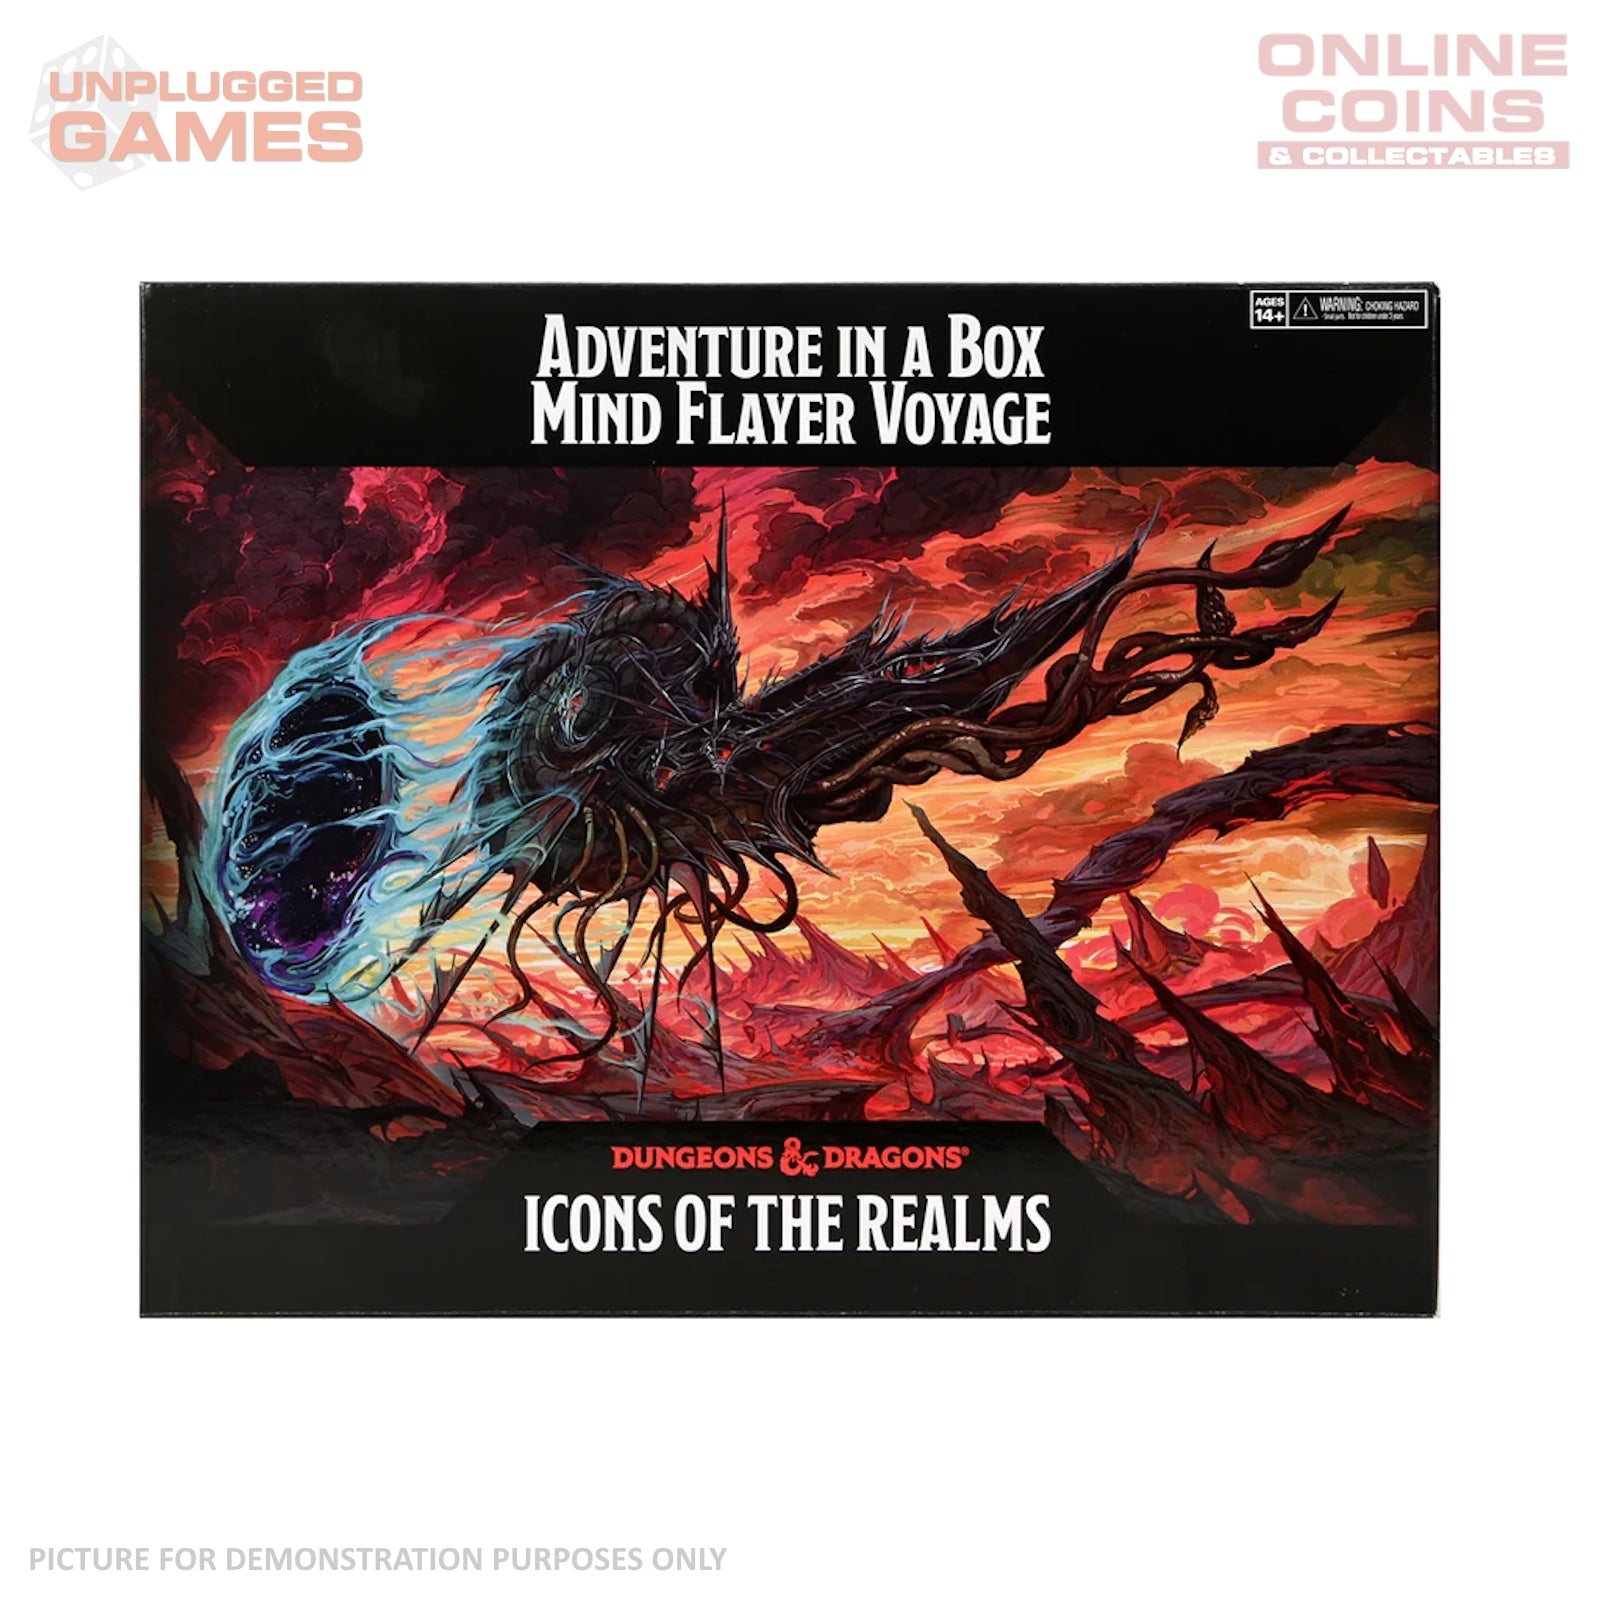 Dungeons & Dragons Icons of the Realms - Adventure in a Box Mind Flayer Voyage